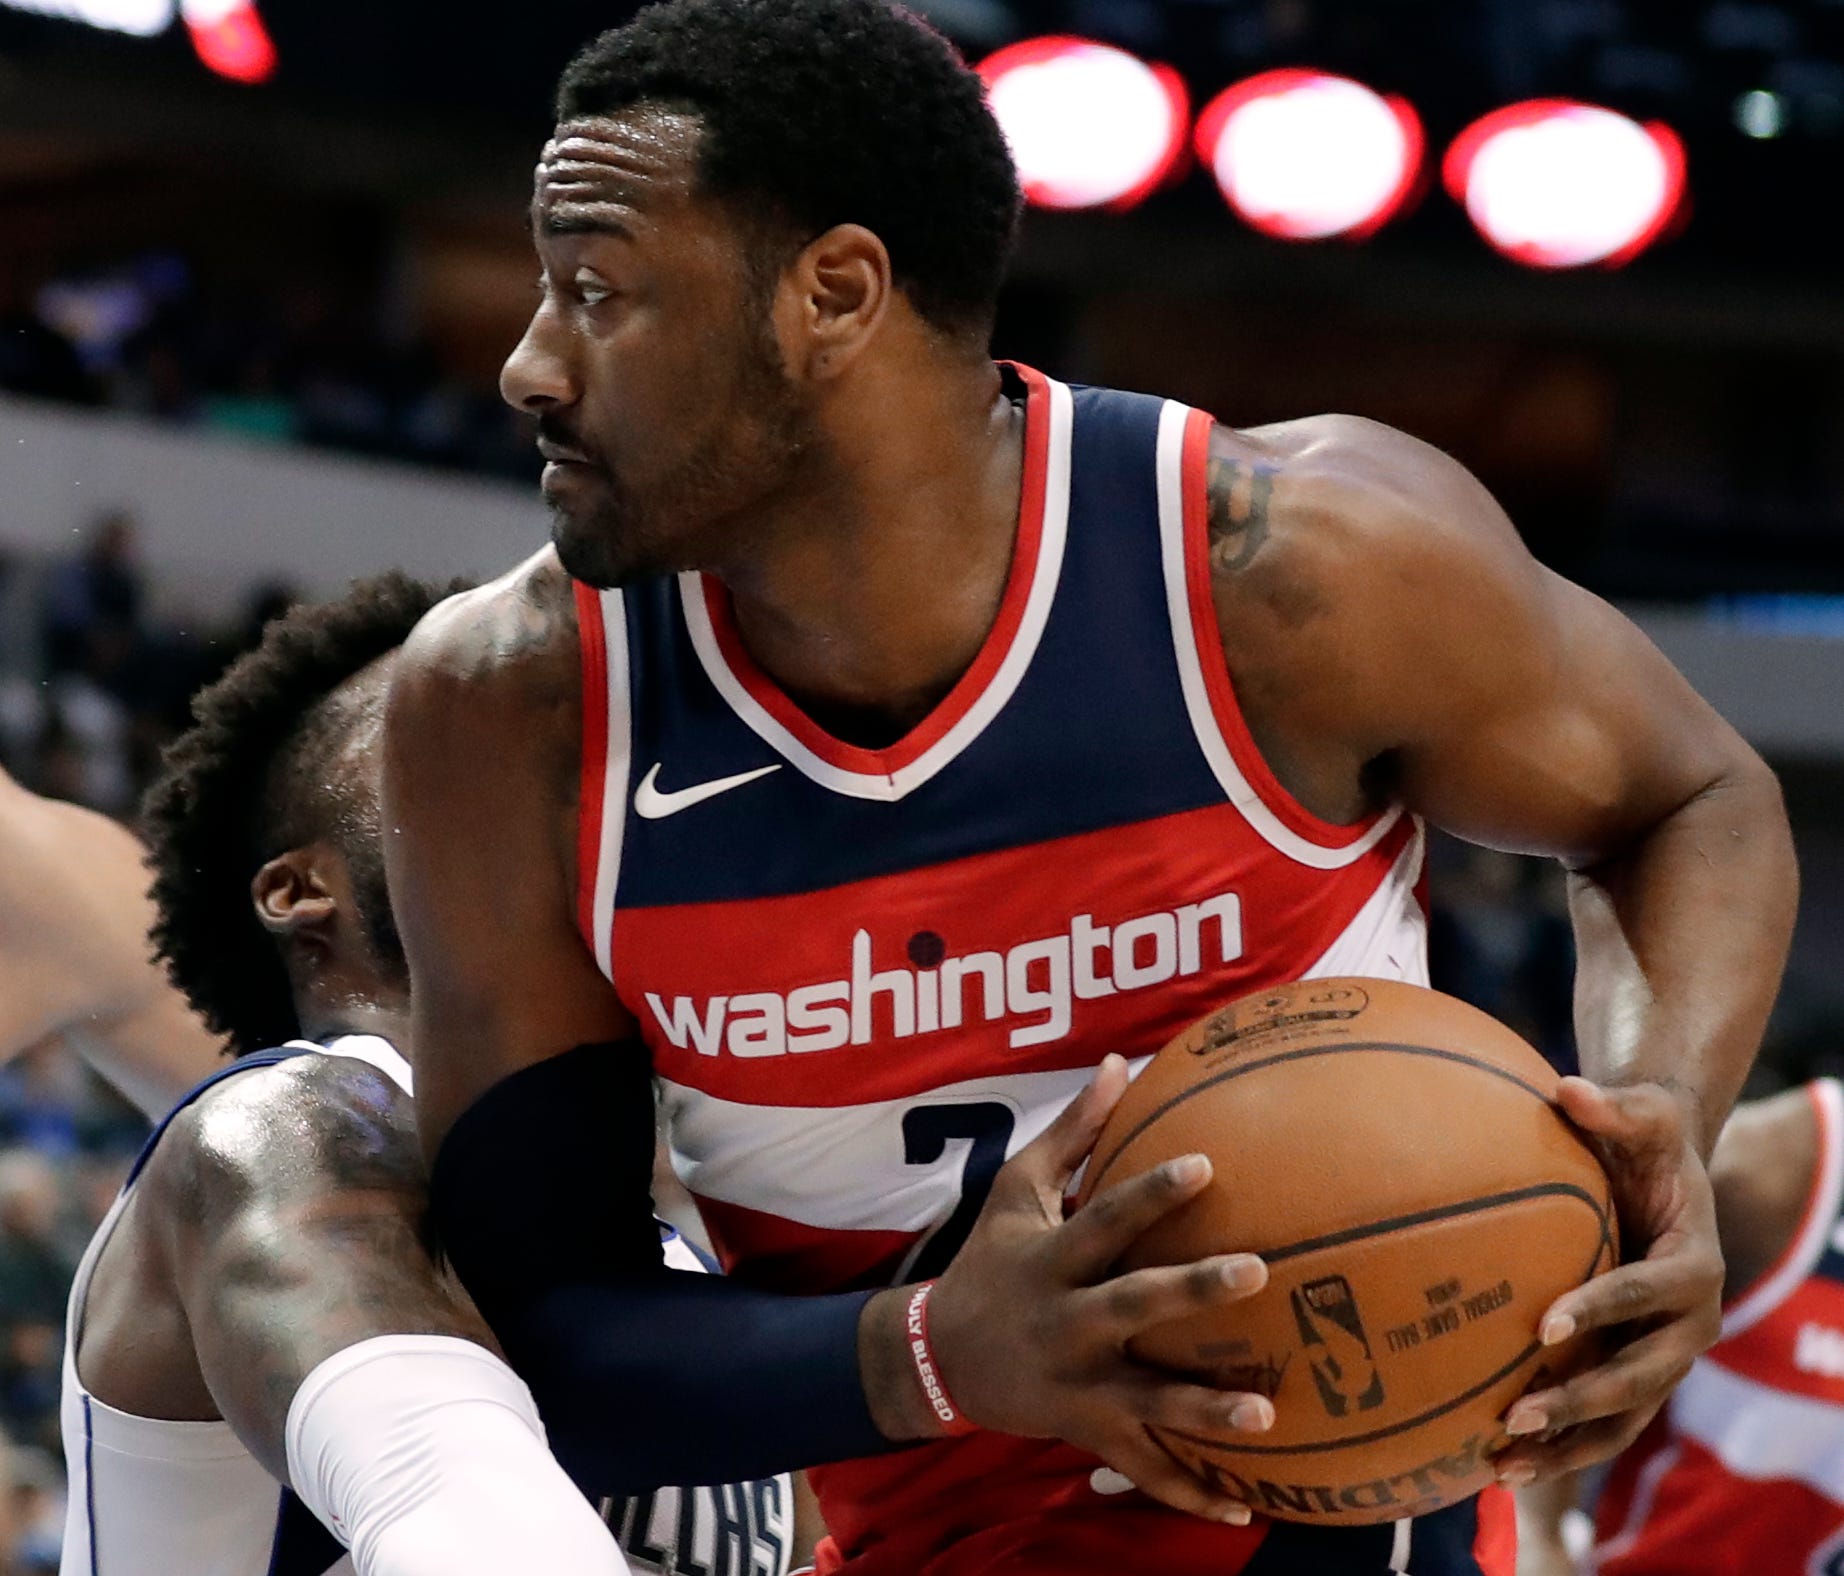 Dallas Mavericks guard Wesley Matthews, center left, and Salah Mejri (50), of Tunisia, defend as Washington Wizards' John Wall (2) works for a shot opportunity in the first half of an NBA basketball game, Monday, Jan. 22, 2018, in Dallas. (AP Photo/T